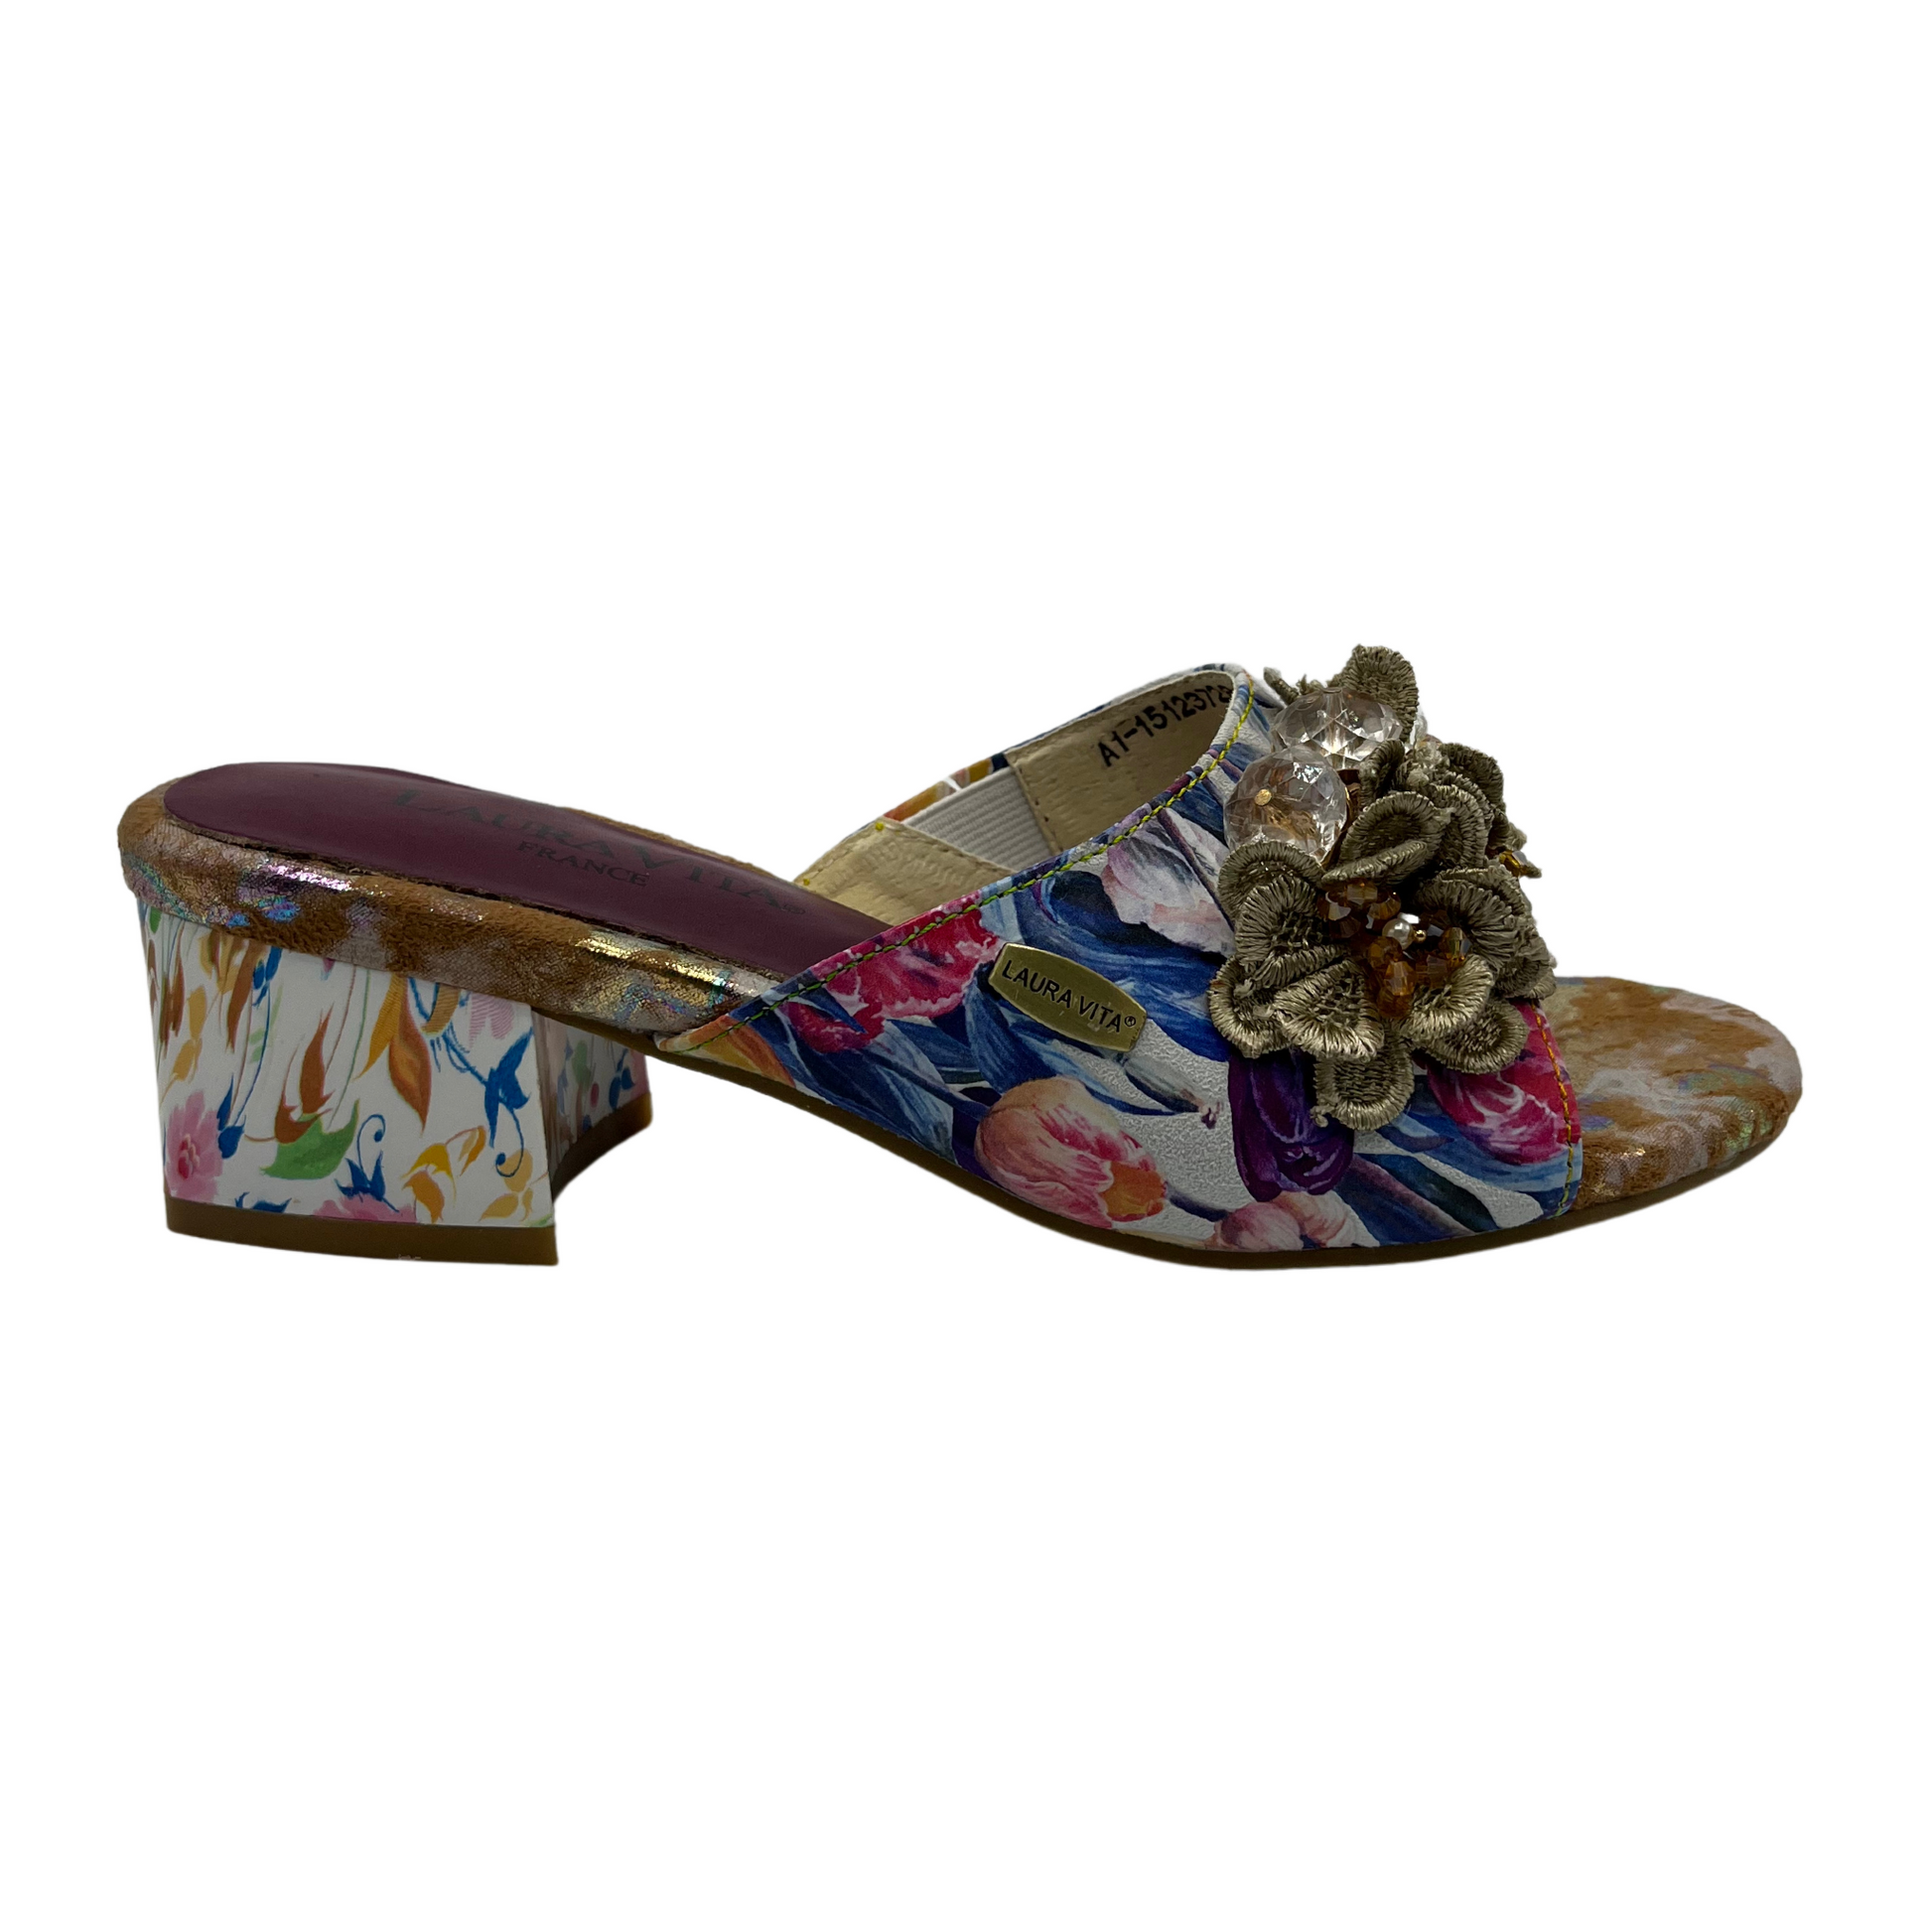 Right facing view of floral slip on sandal with flower accents on upper. Open toe and block heel